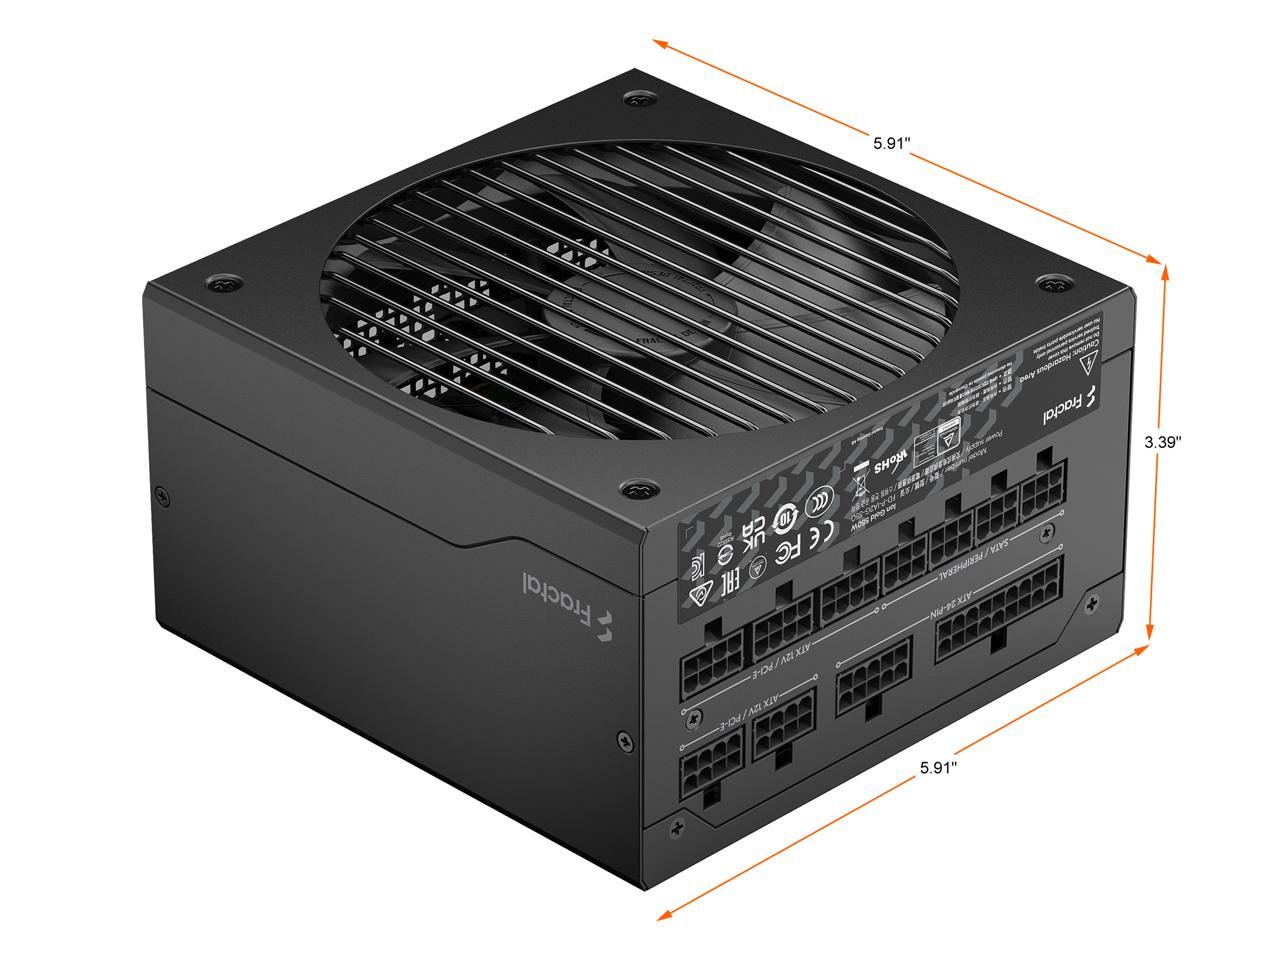 Fractal Design Ion Gold 550W 80 PLUS Gold Certified Fully Modular ATX Power Supply